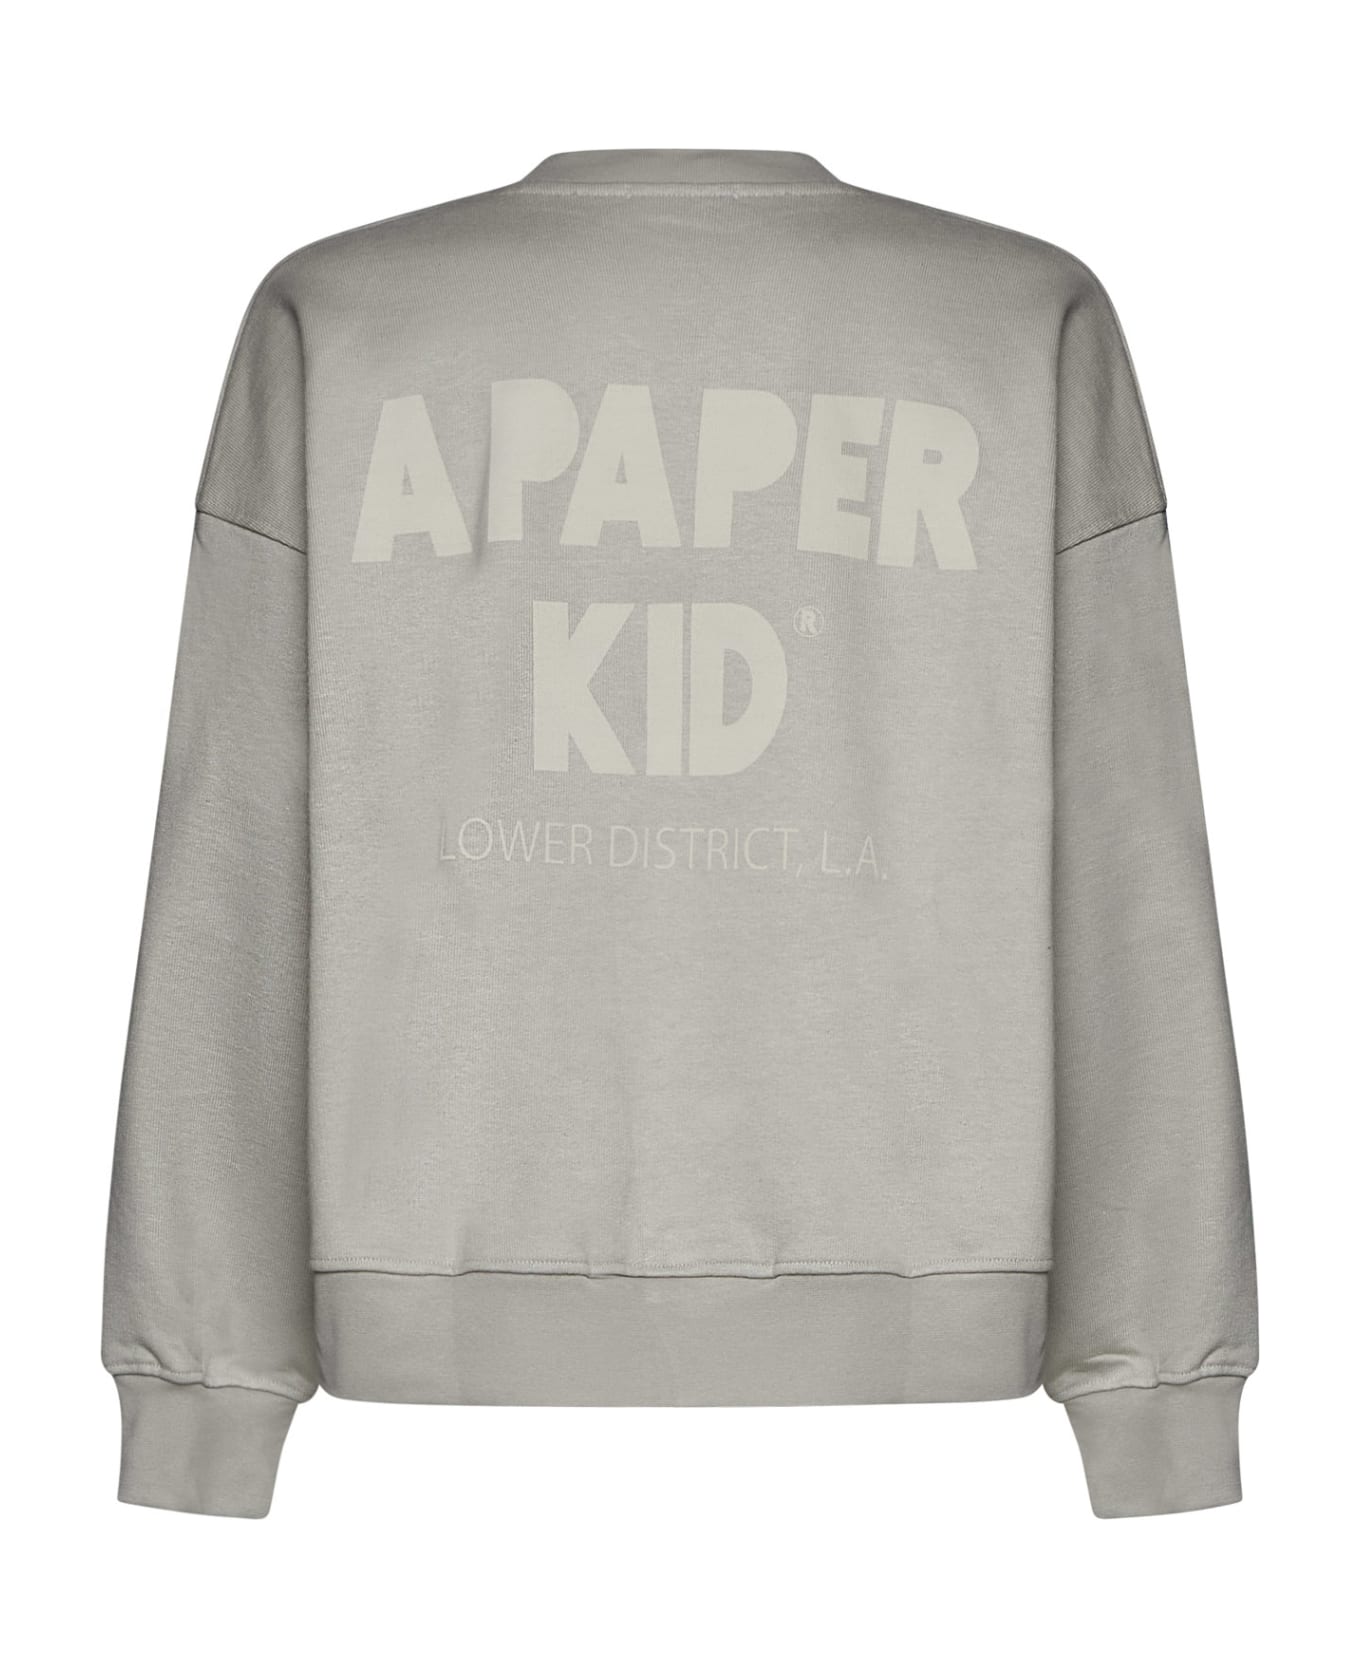 A Paper Kid Sweater - Grey